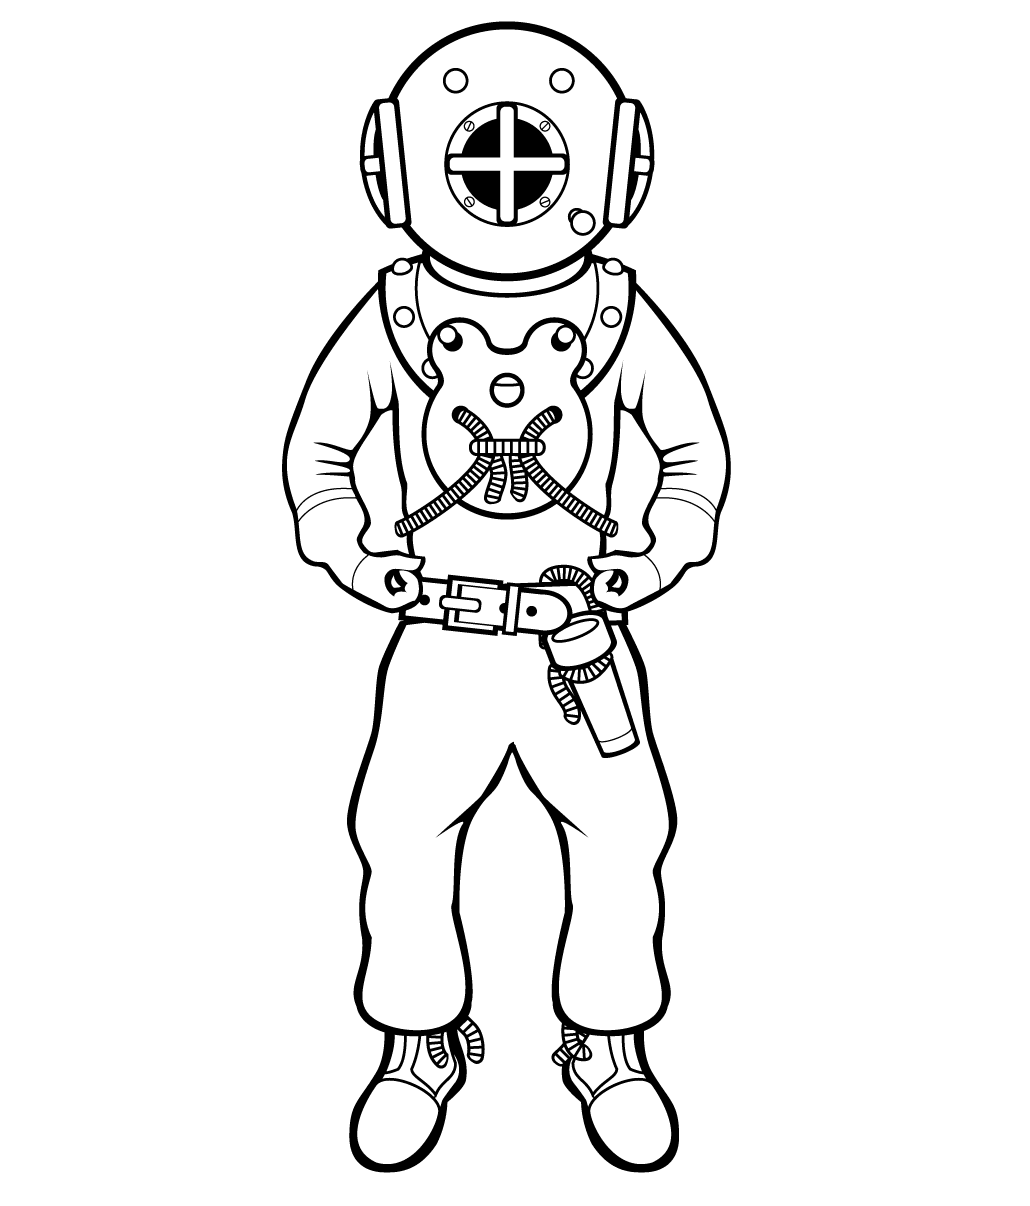 Diving Suit Coloring Page - Free Printable Coloring Pages for Kids